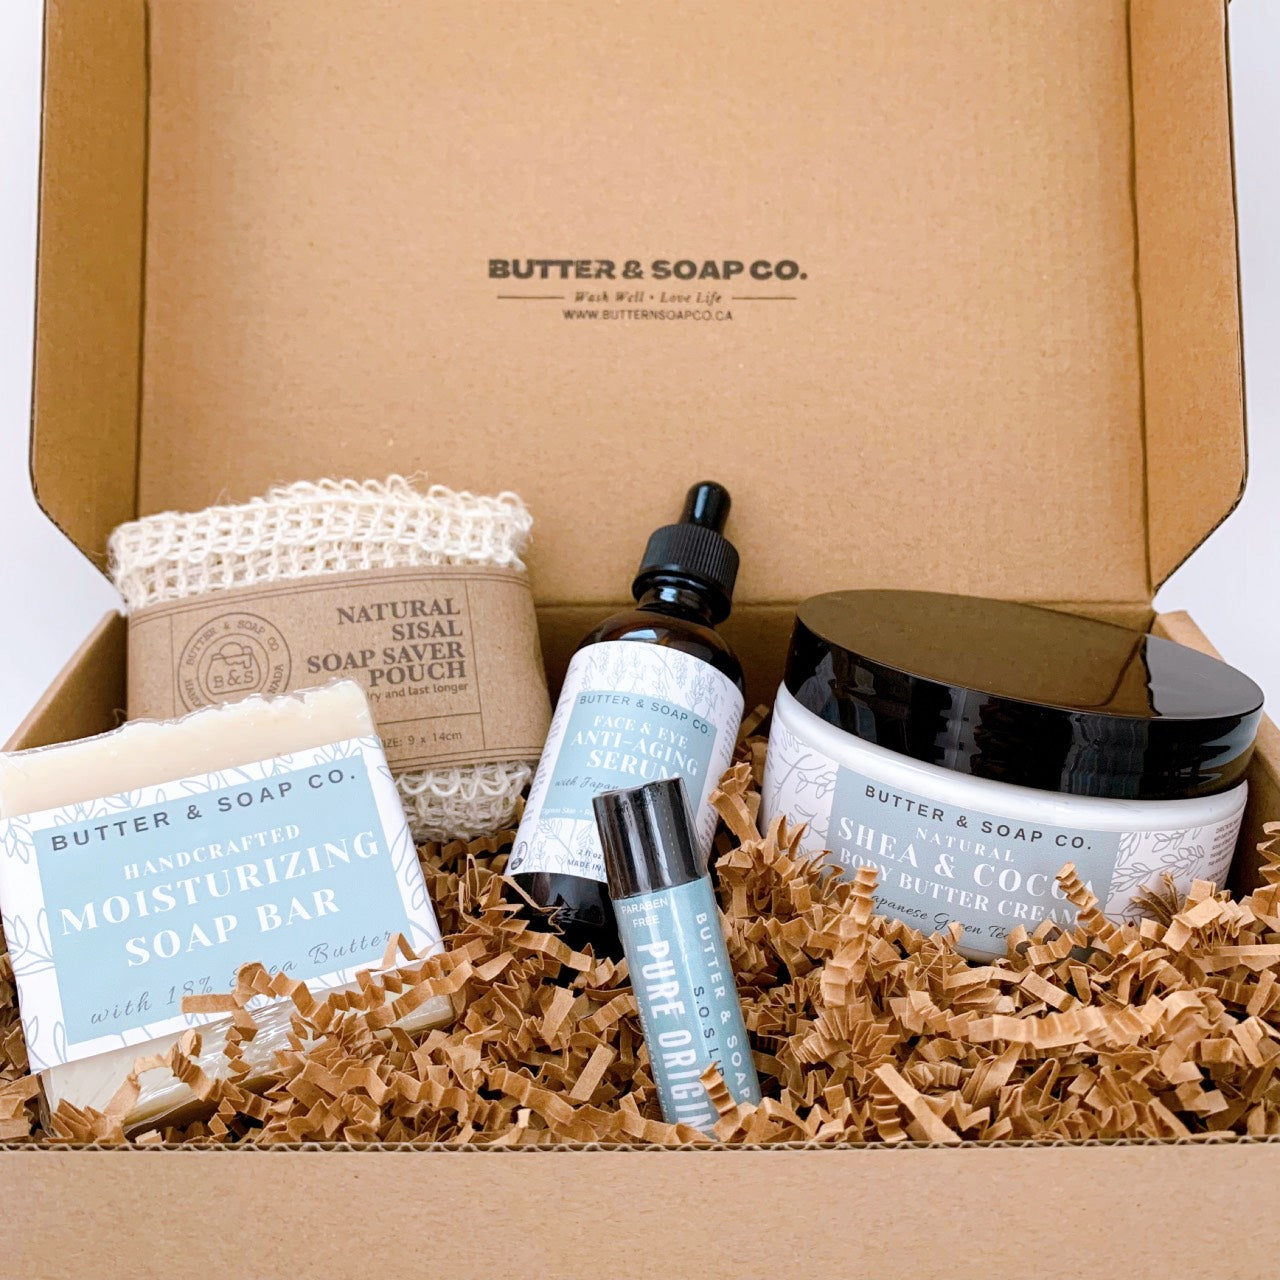 Butter & Soap Co. Original Natural Bath and Body Gift Sets